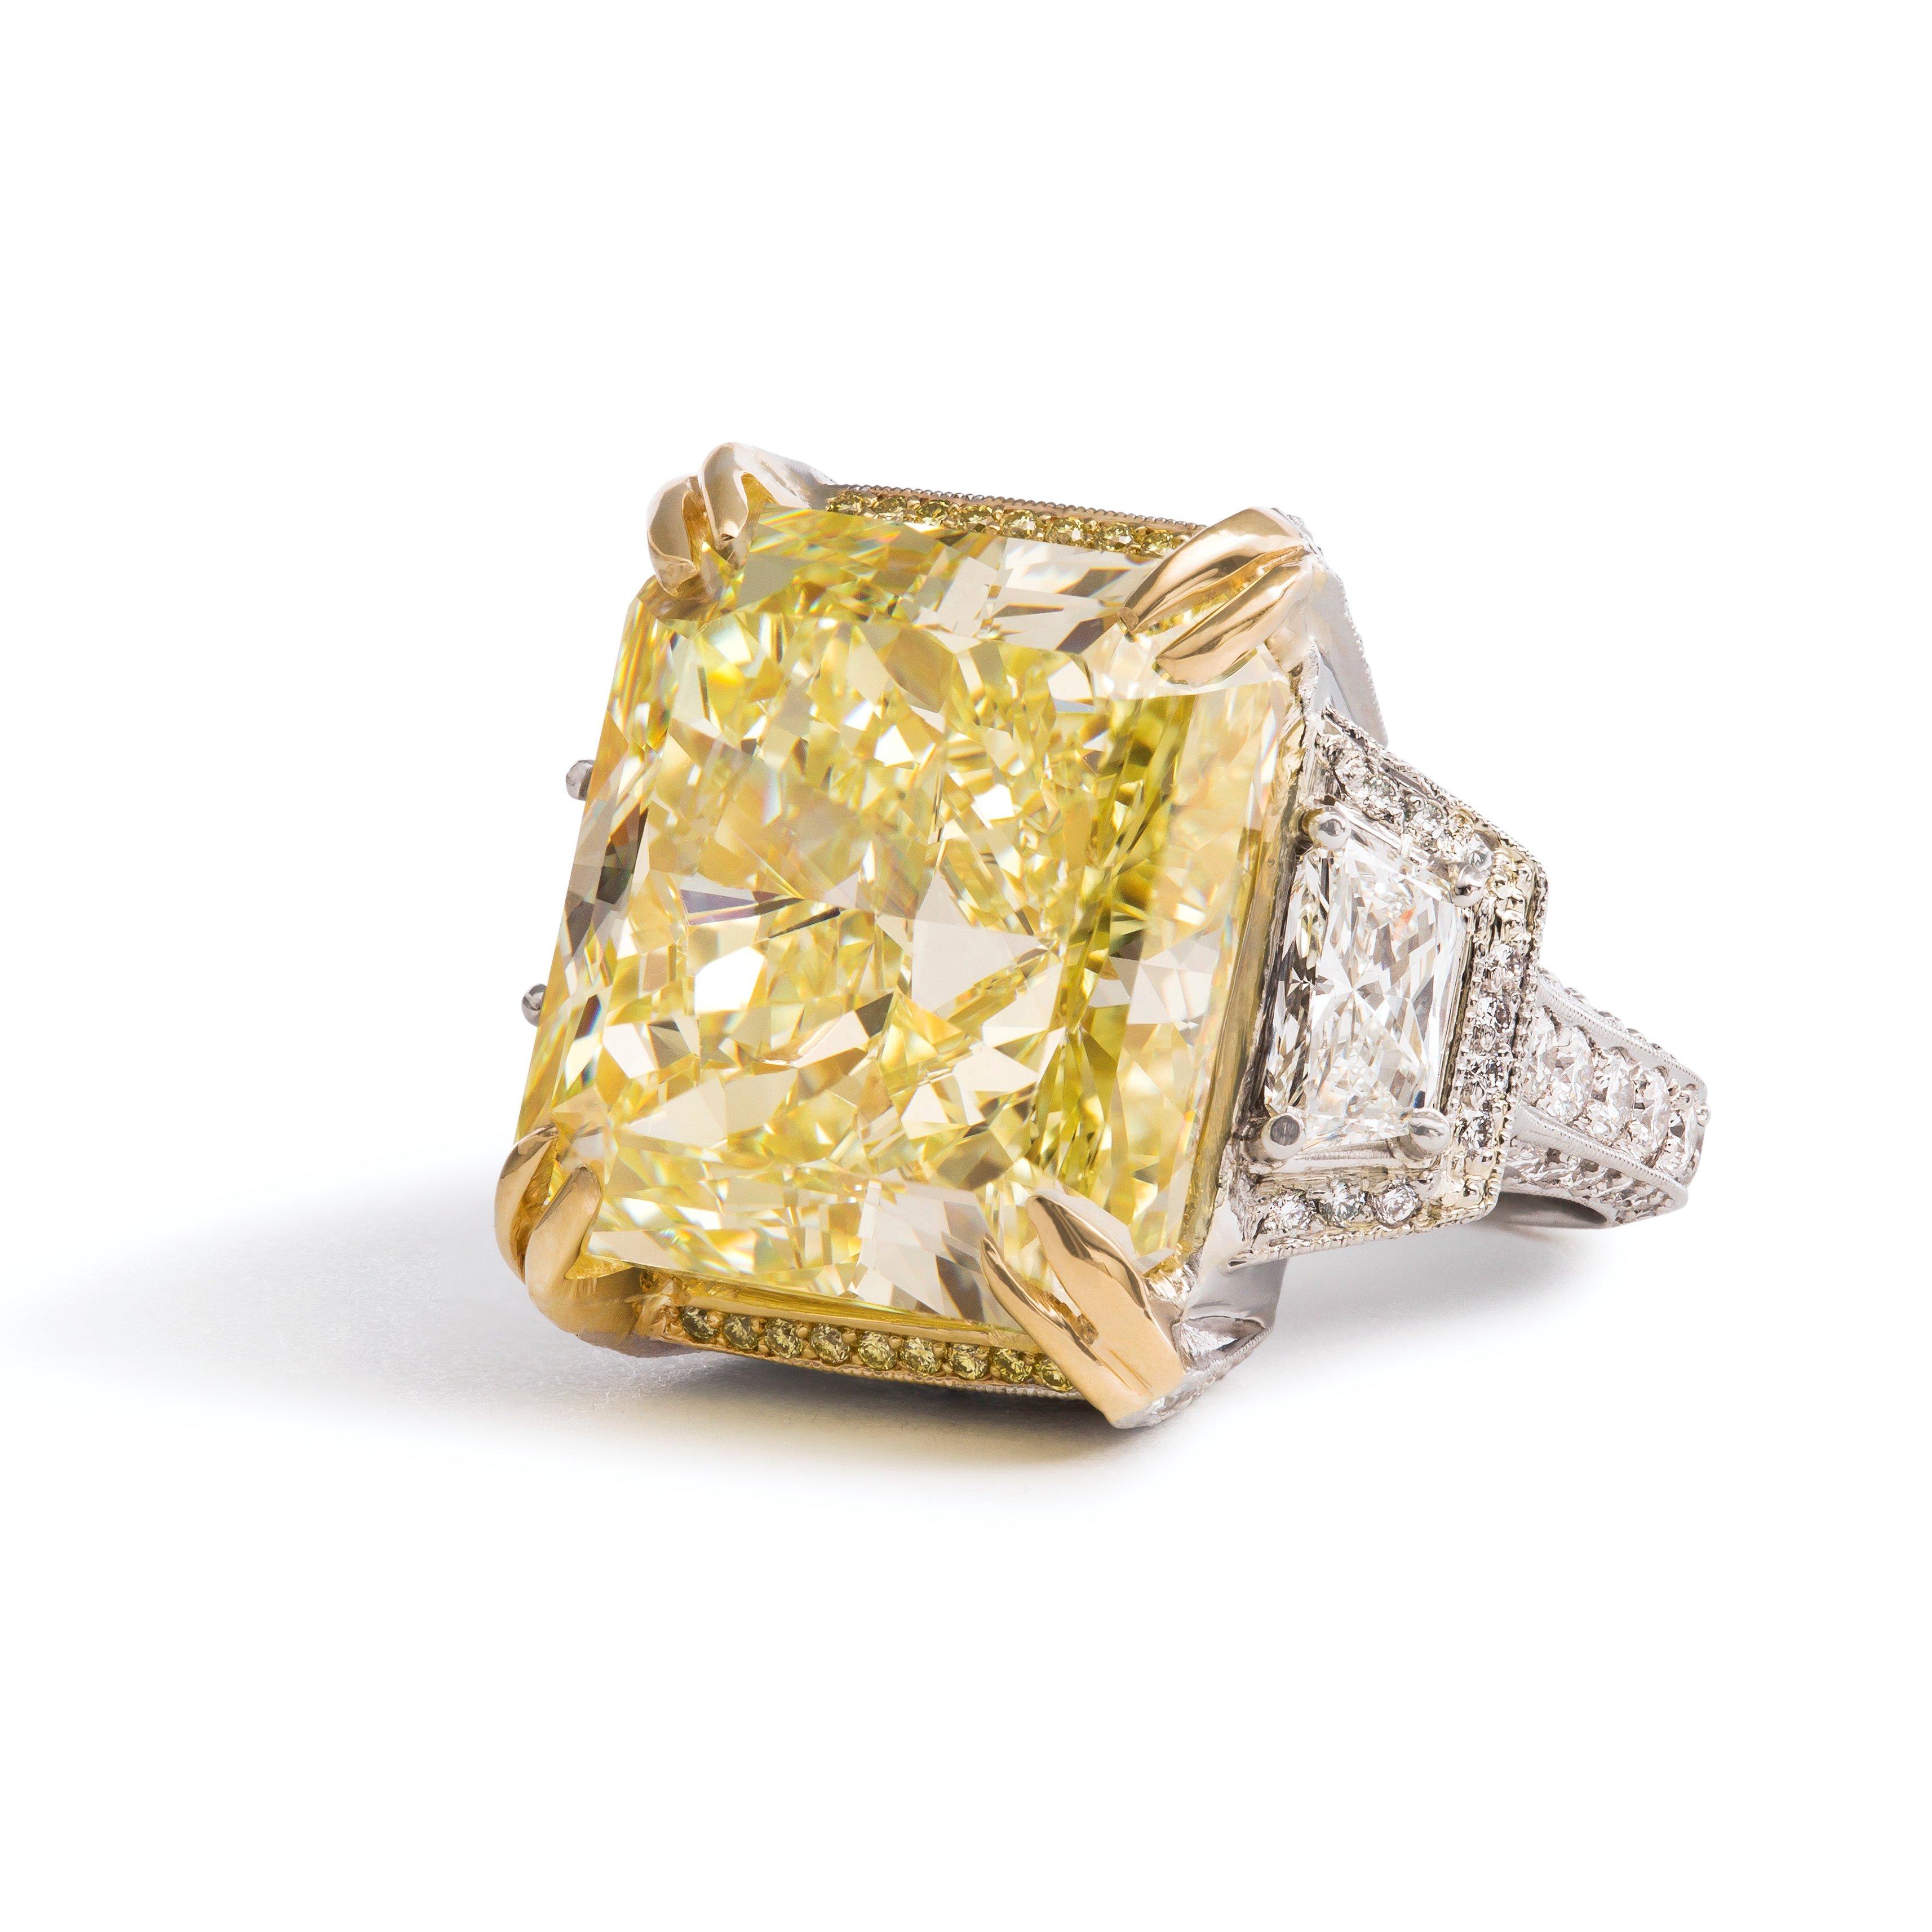 Michael Beaudry 21.57 carat fancy yellow radiant cut diamond ring in platinum and 18k yellow gold, accompanied by GIA report.

The centerpiece of this striking ring is a GIA certified 21.57 carat fancy yellow radiant cut diamond with VS1 clarity. 